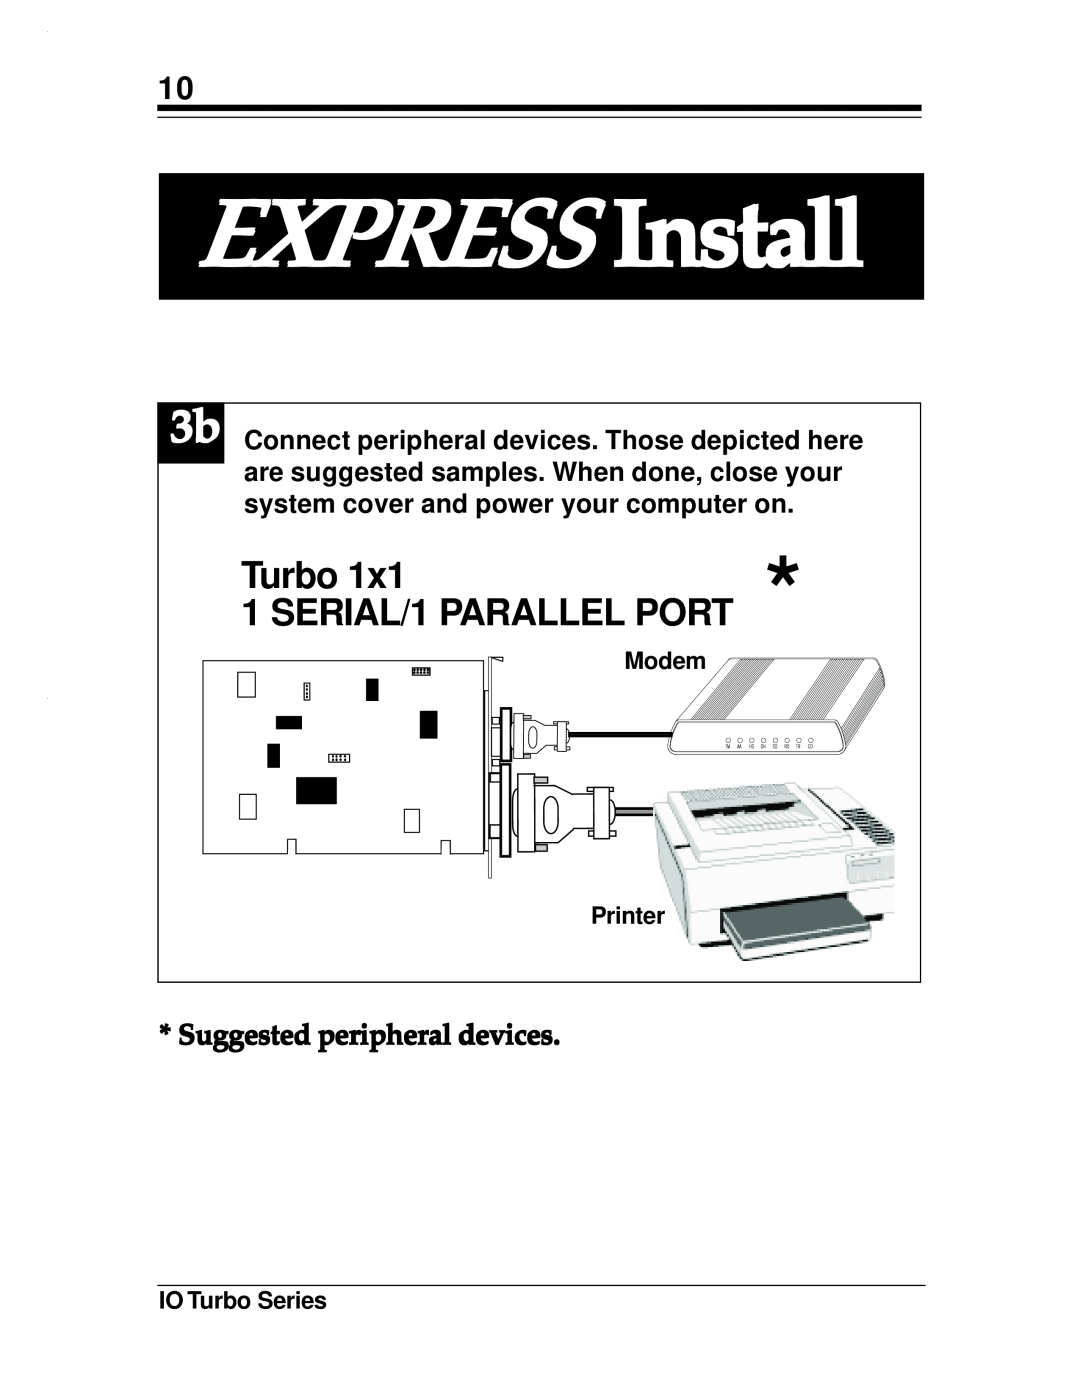 Boca Research Turbo1x1, 2x2 manual EXPRESS Install, SERIAL/1 PARALLEL PORT, Suggested peripheral devices, Modem 